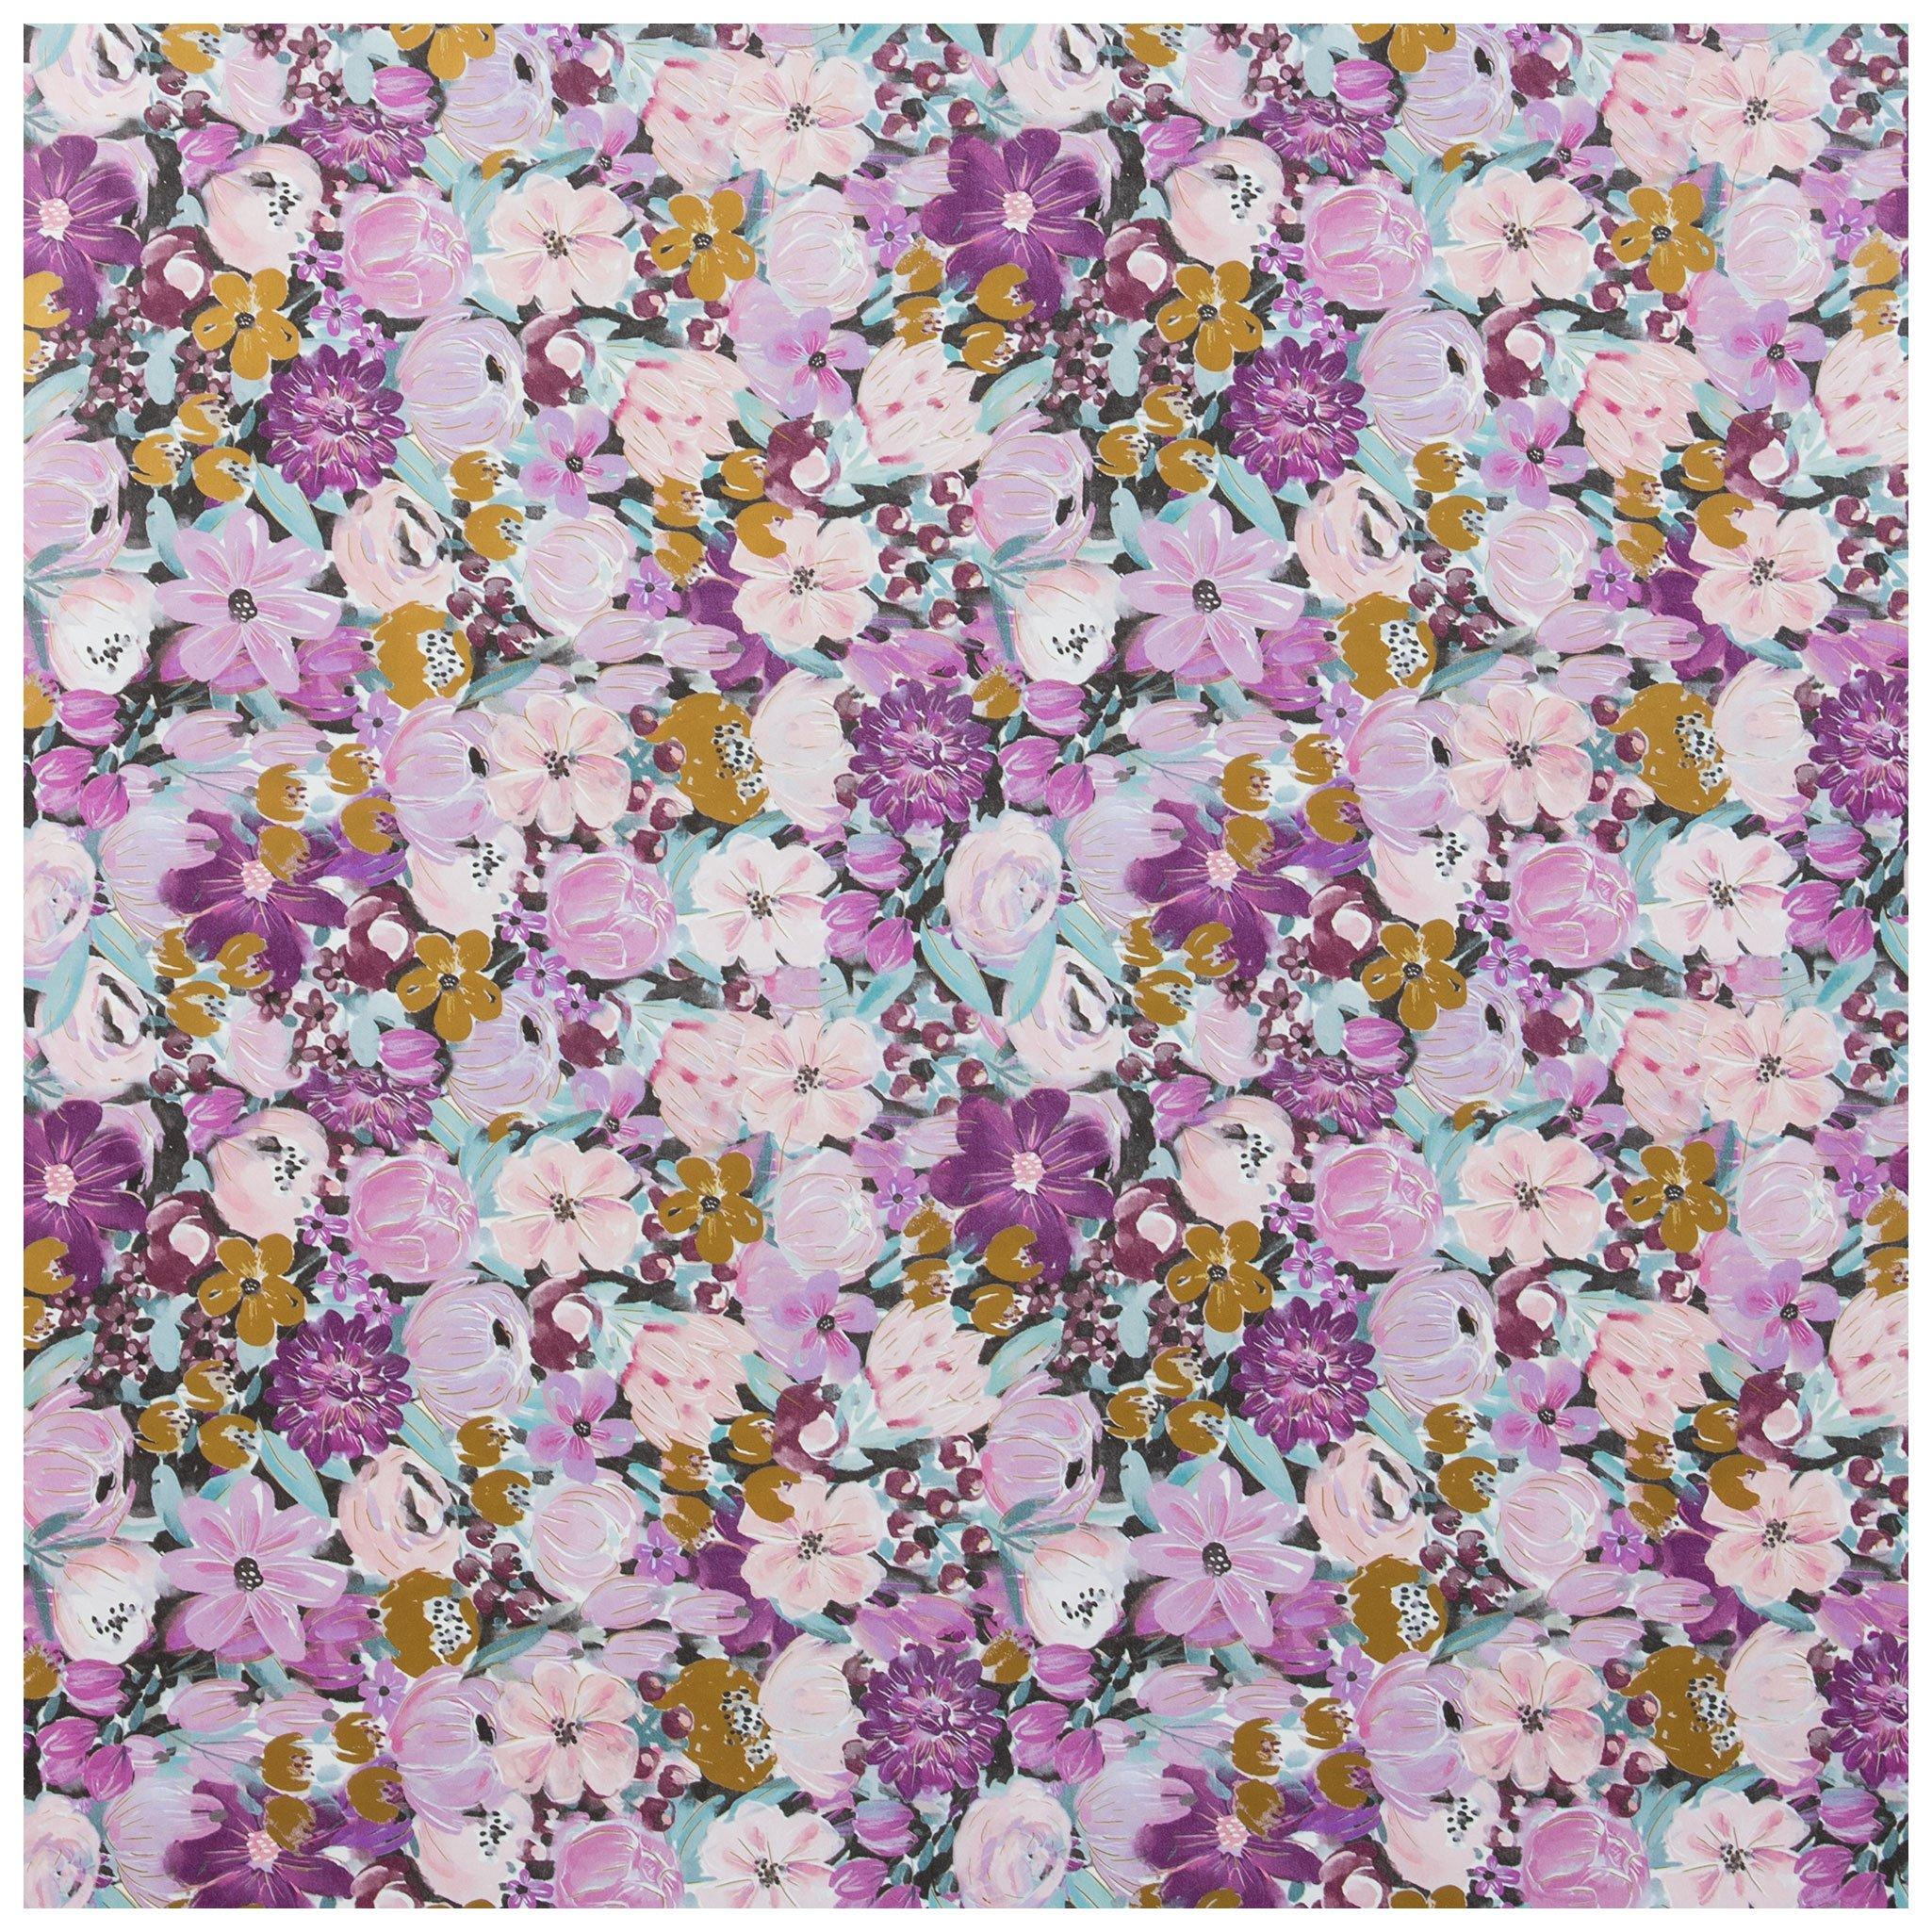 Purple Double Sided Floral Wrapping Paper - 20 Sheets - LO Florist Supplies